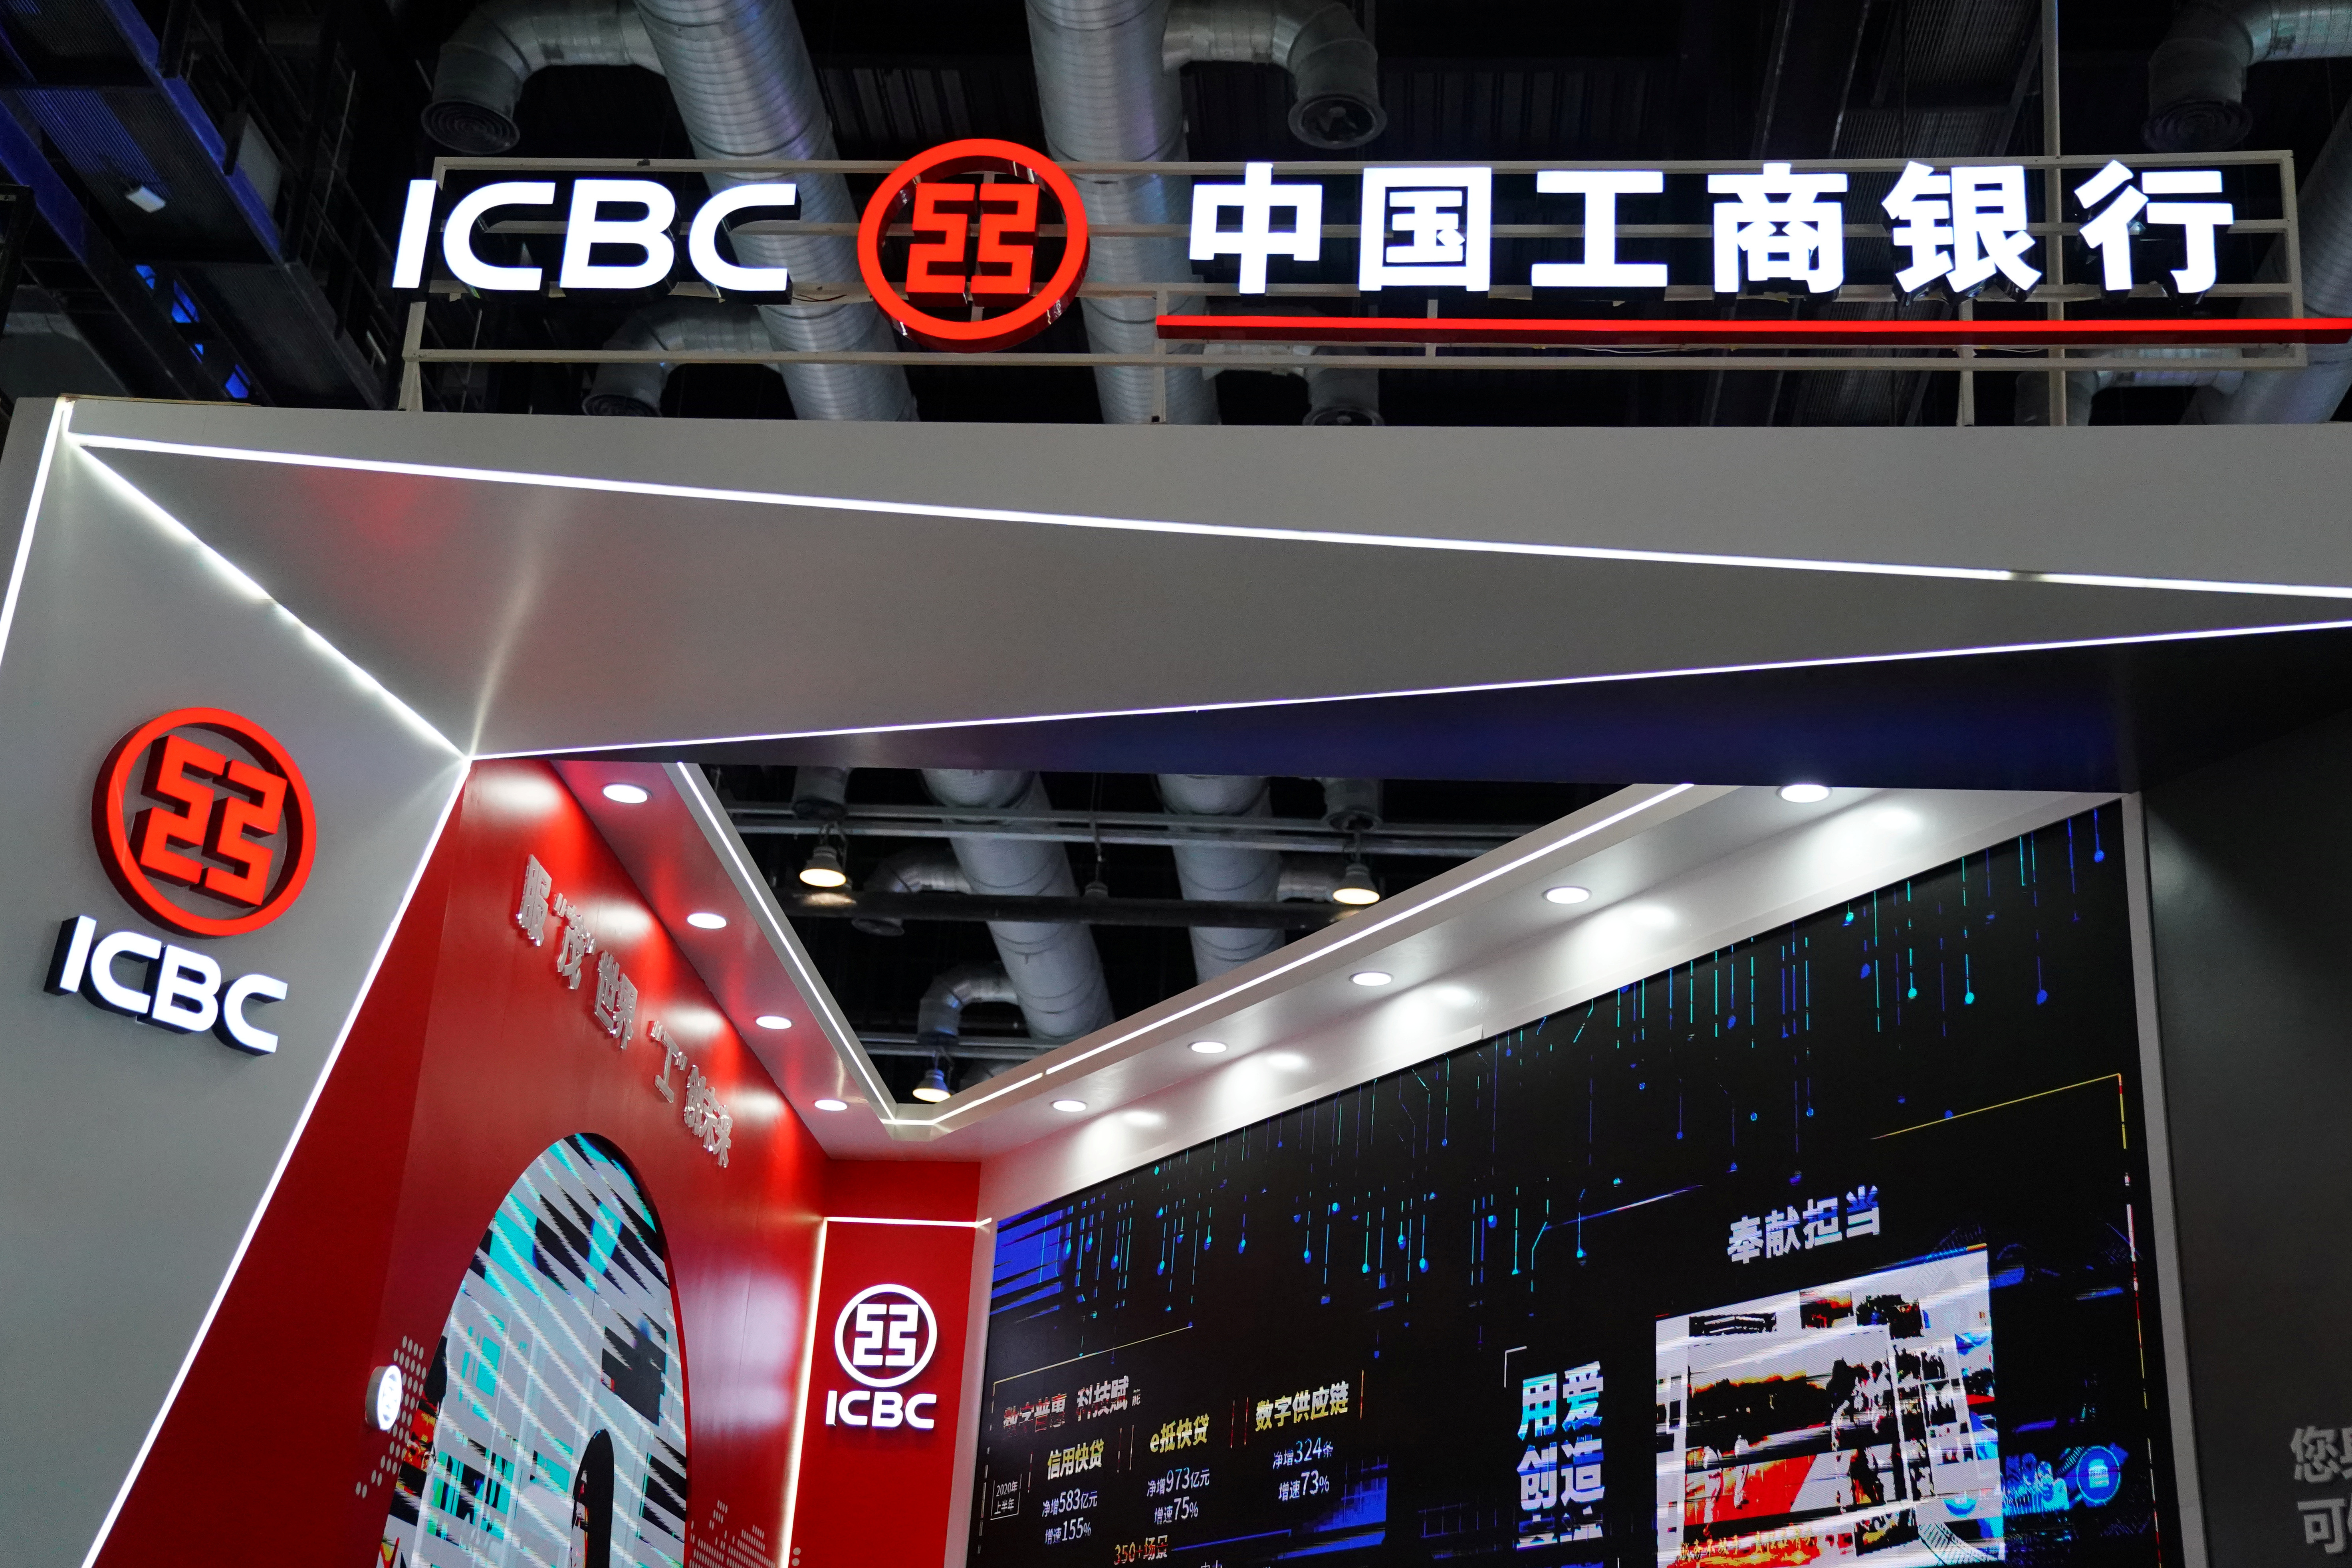 ICBC booth is seen at the 2020 China International Fair for Trade in Services in Beijing